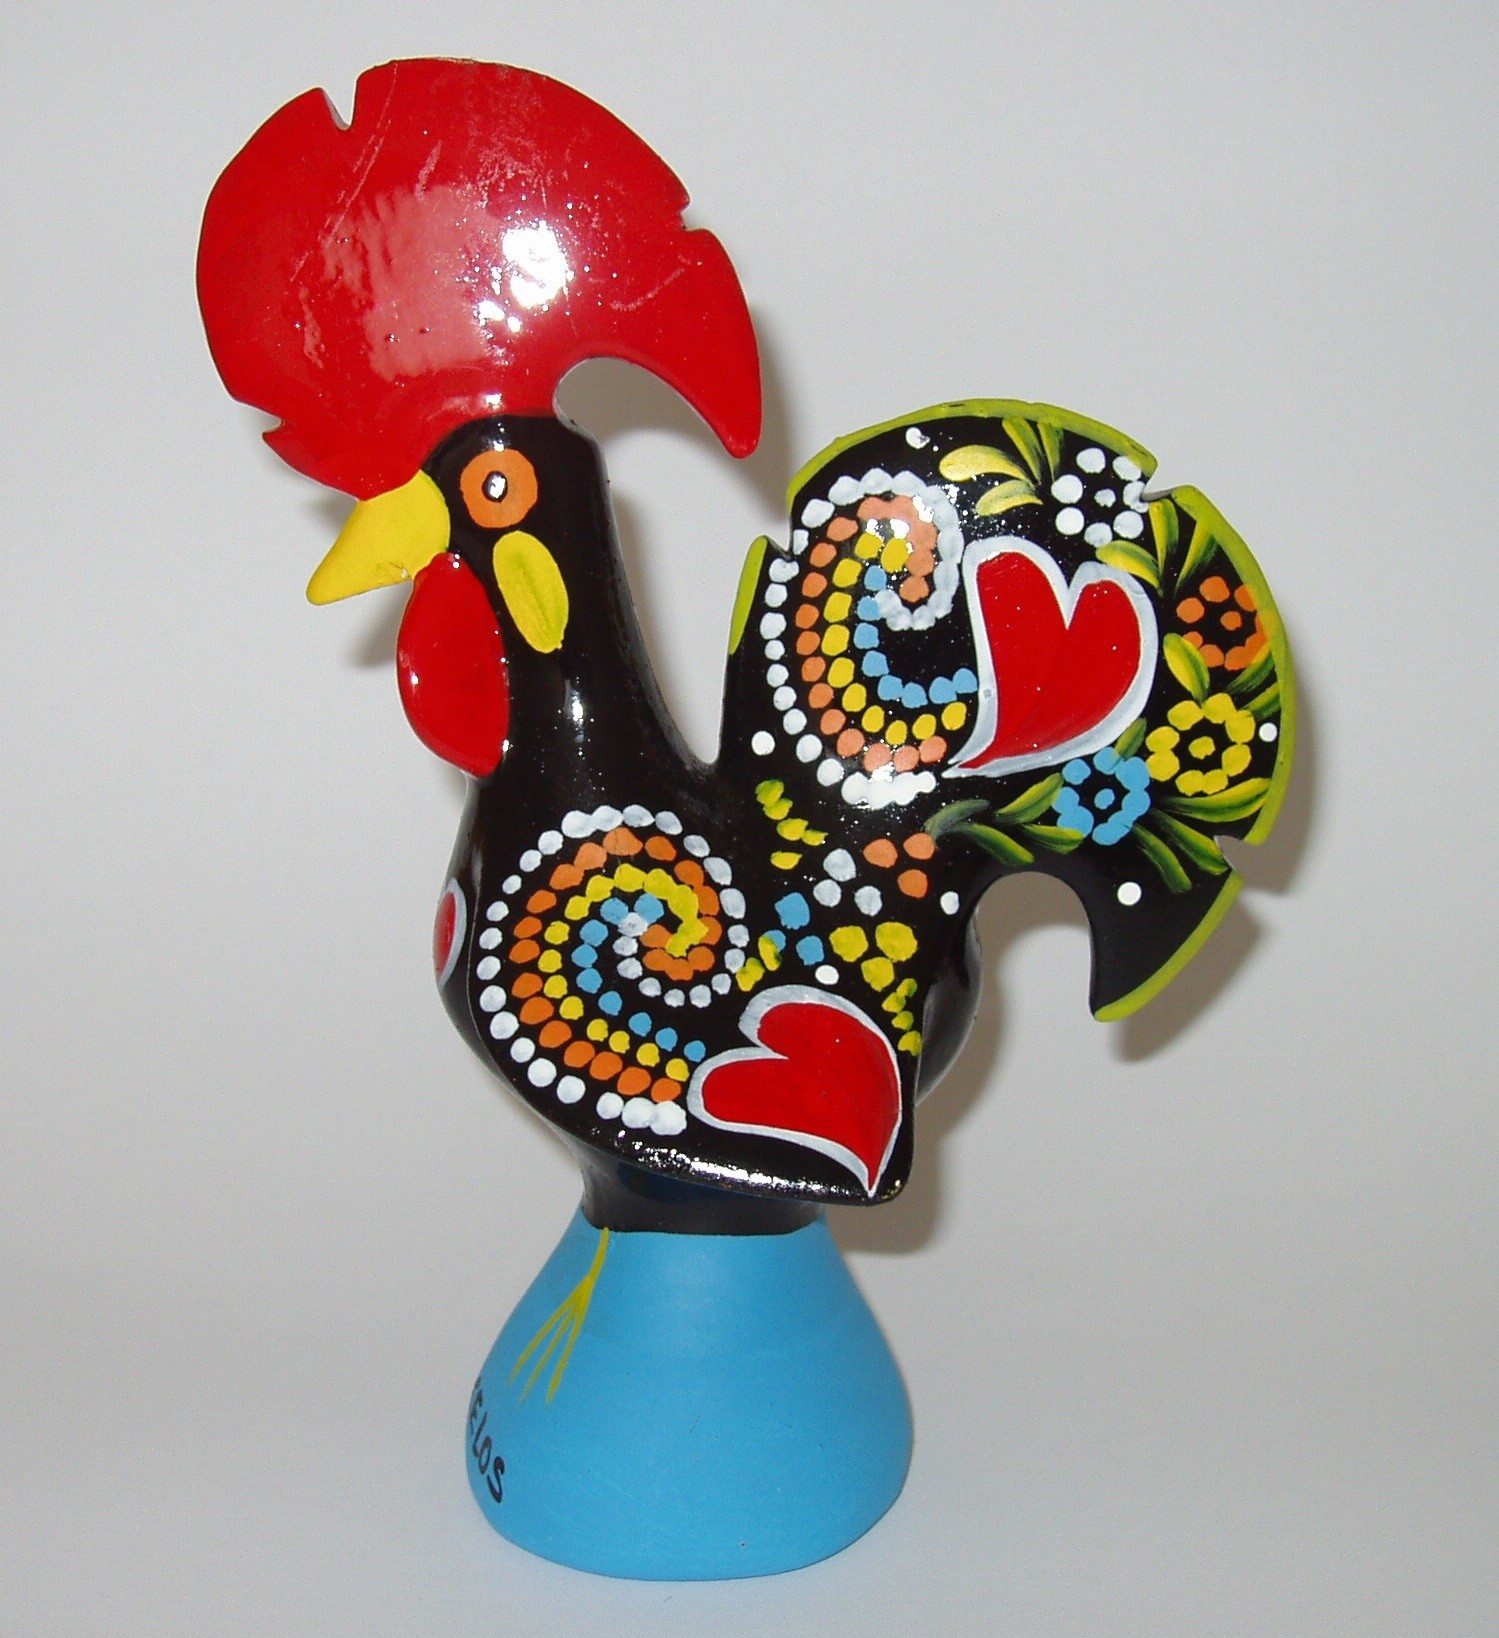 The Barcelos Rooster of Portugal, also known as the Portuguese Rooster.